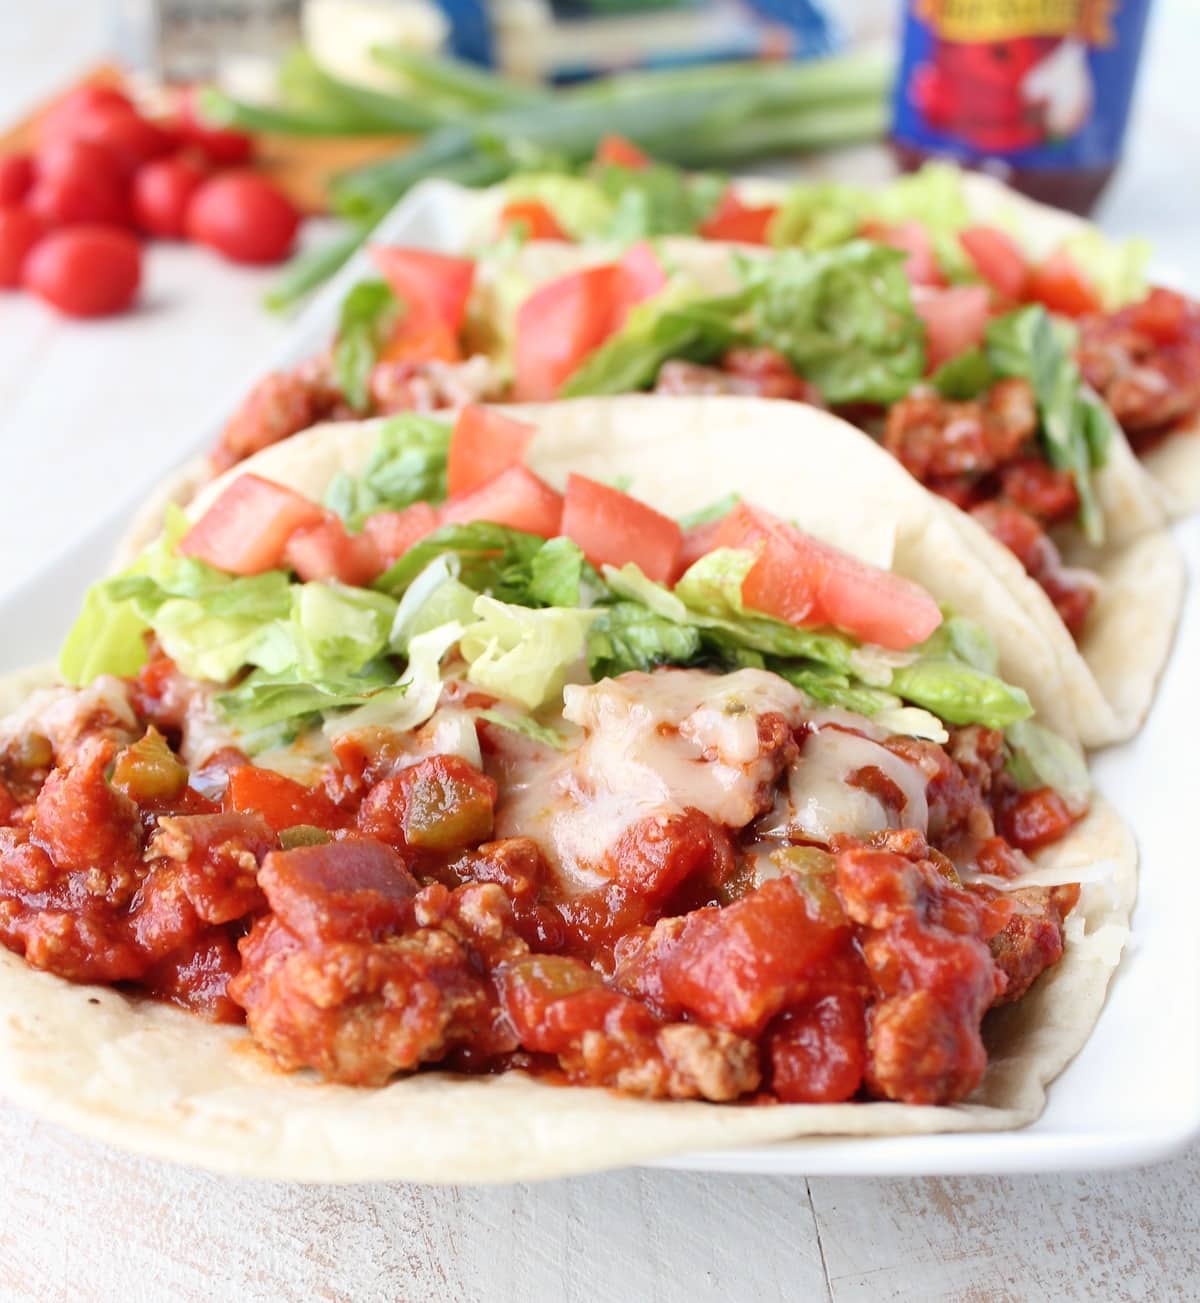 A flour tortilla filled with ground turkey in a red sauce topped with lettuce and tomatoes.